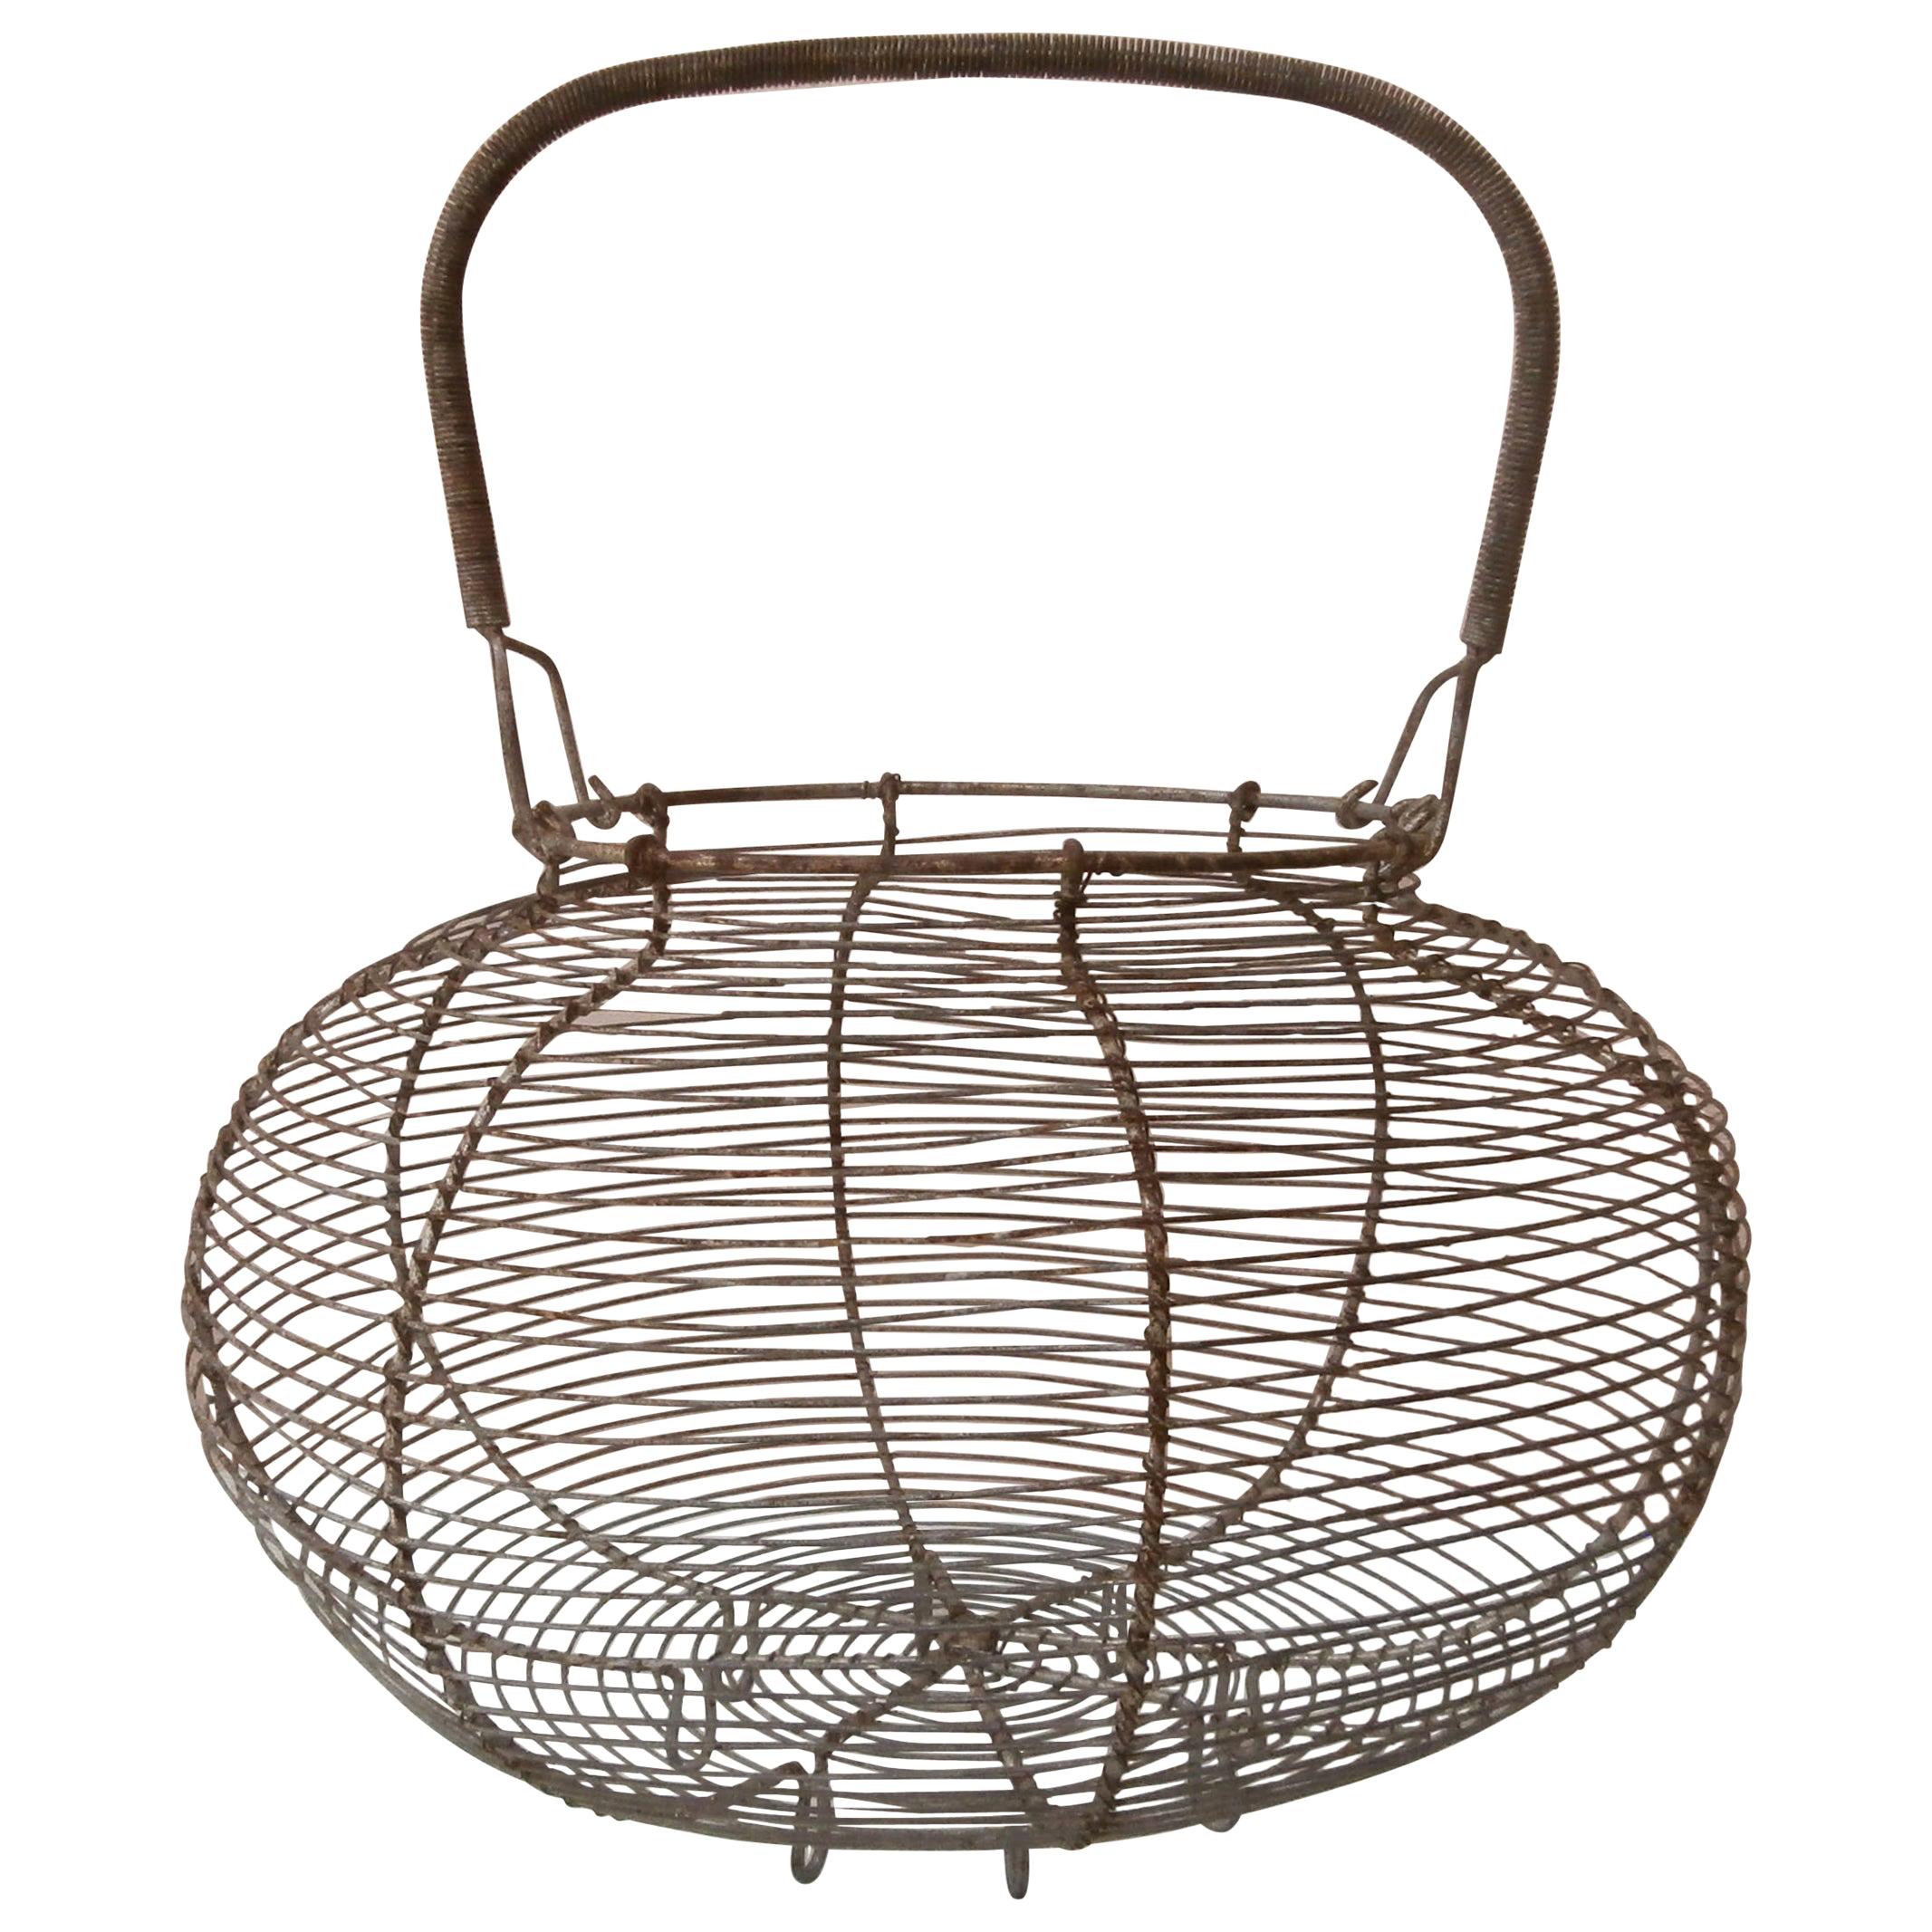 Mid-20th Century French Wire Salad Or Eggs Basket, circa 1940 For Sale